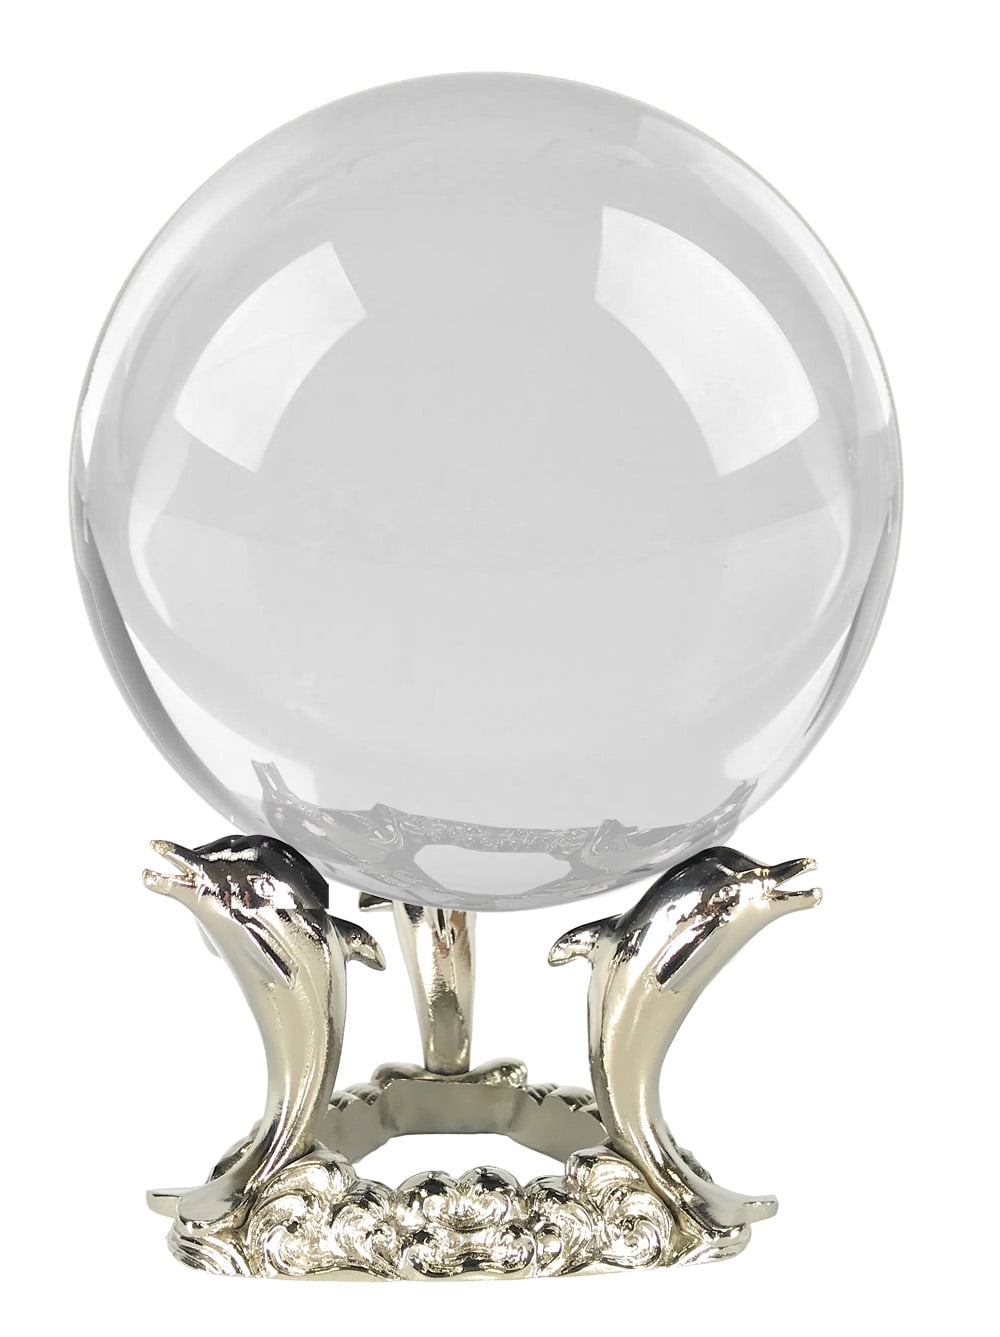 Crystal Ball 110mm 4.2" with Angled Crystal Stand in Gift Box Purple Lavender 